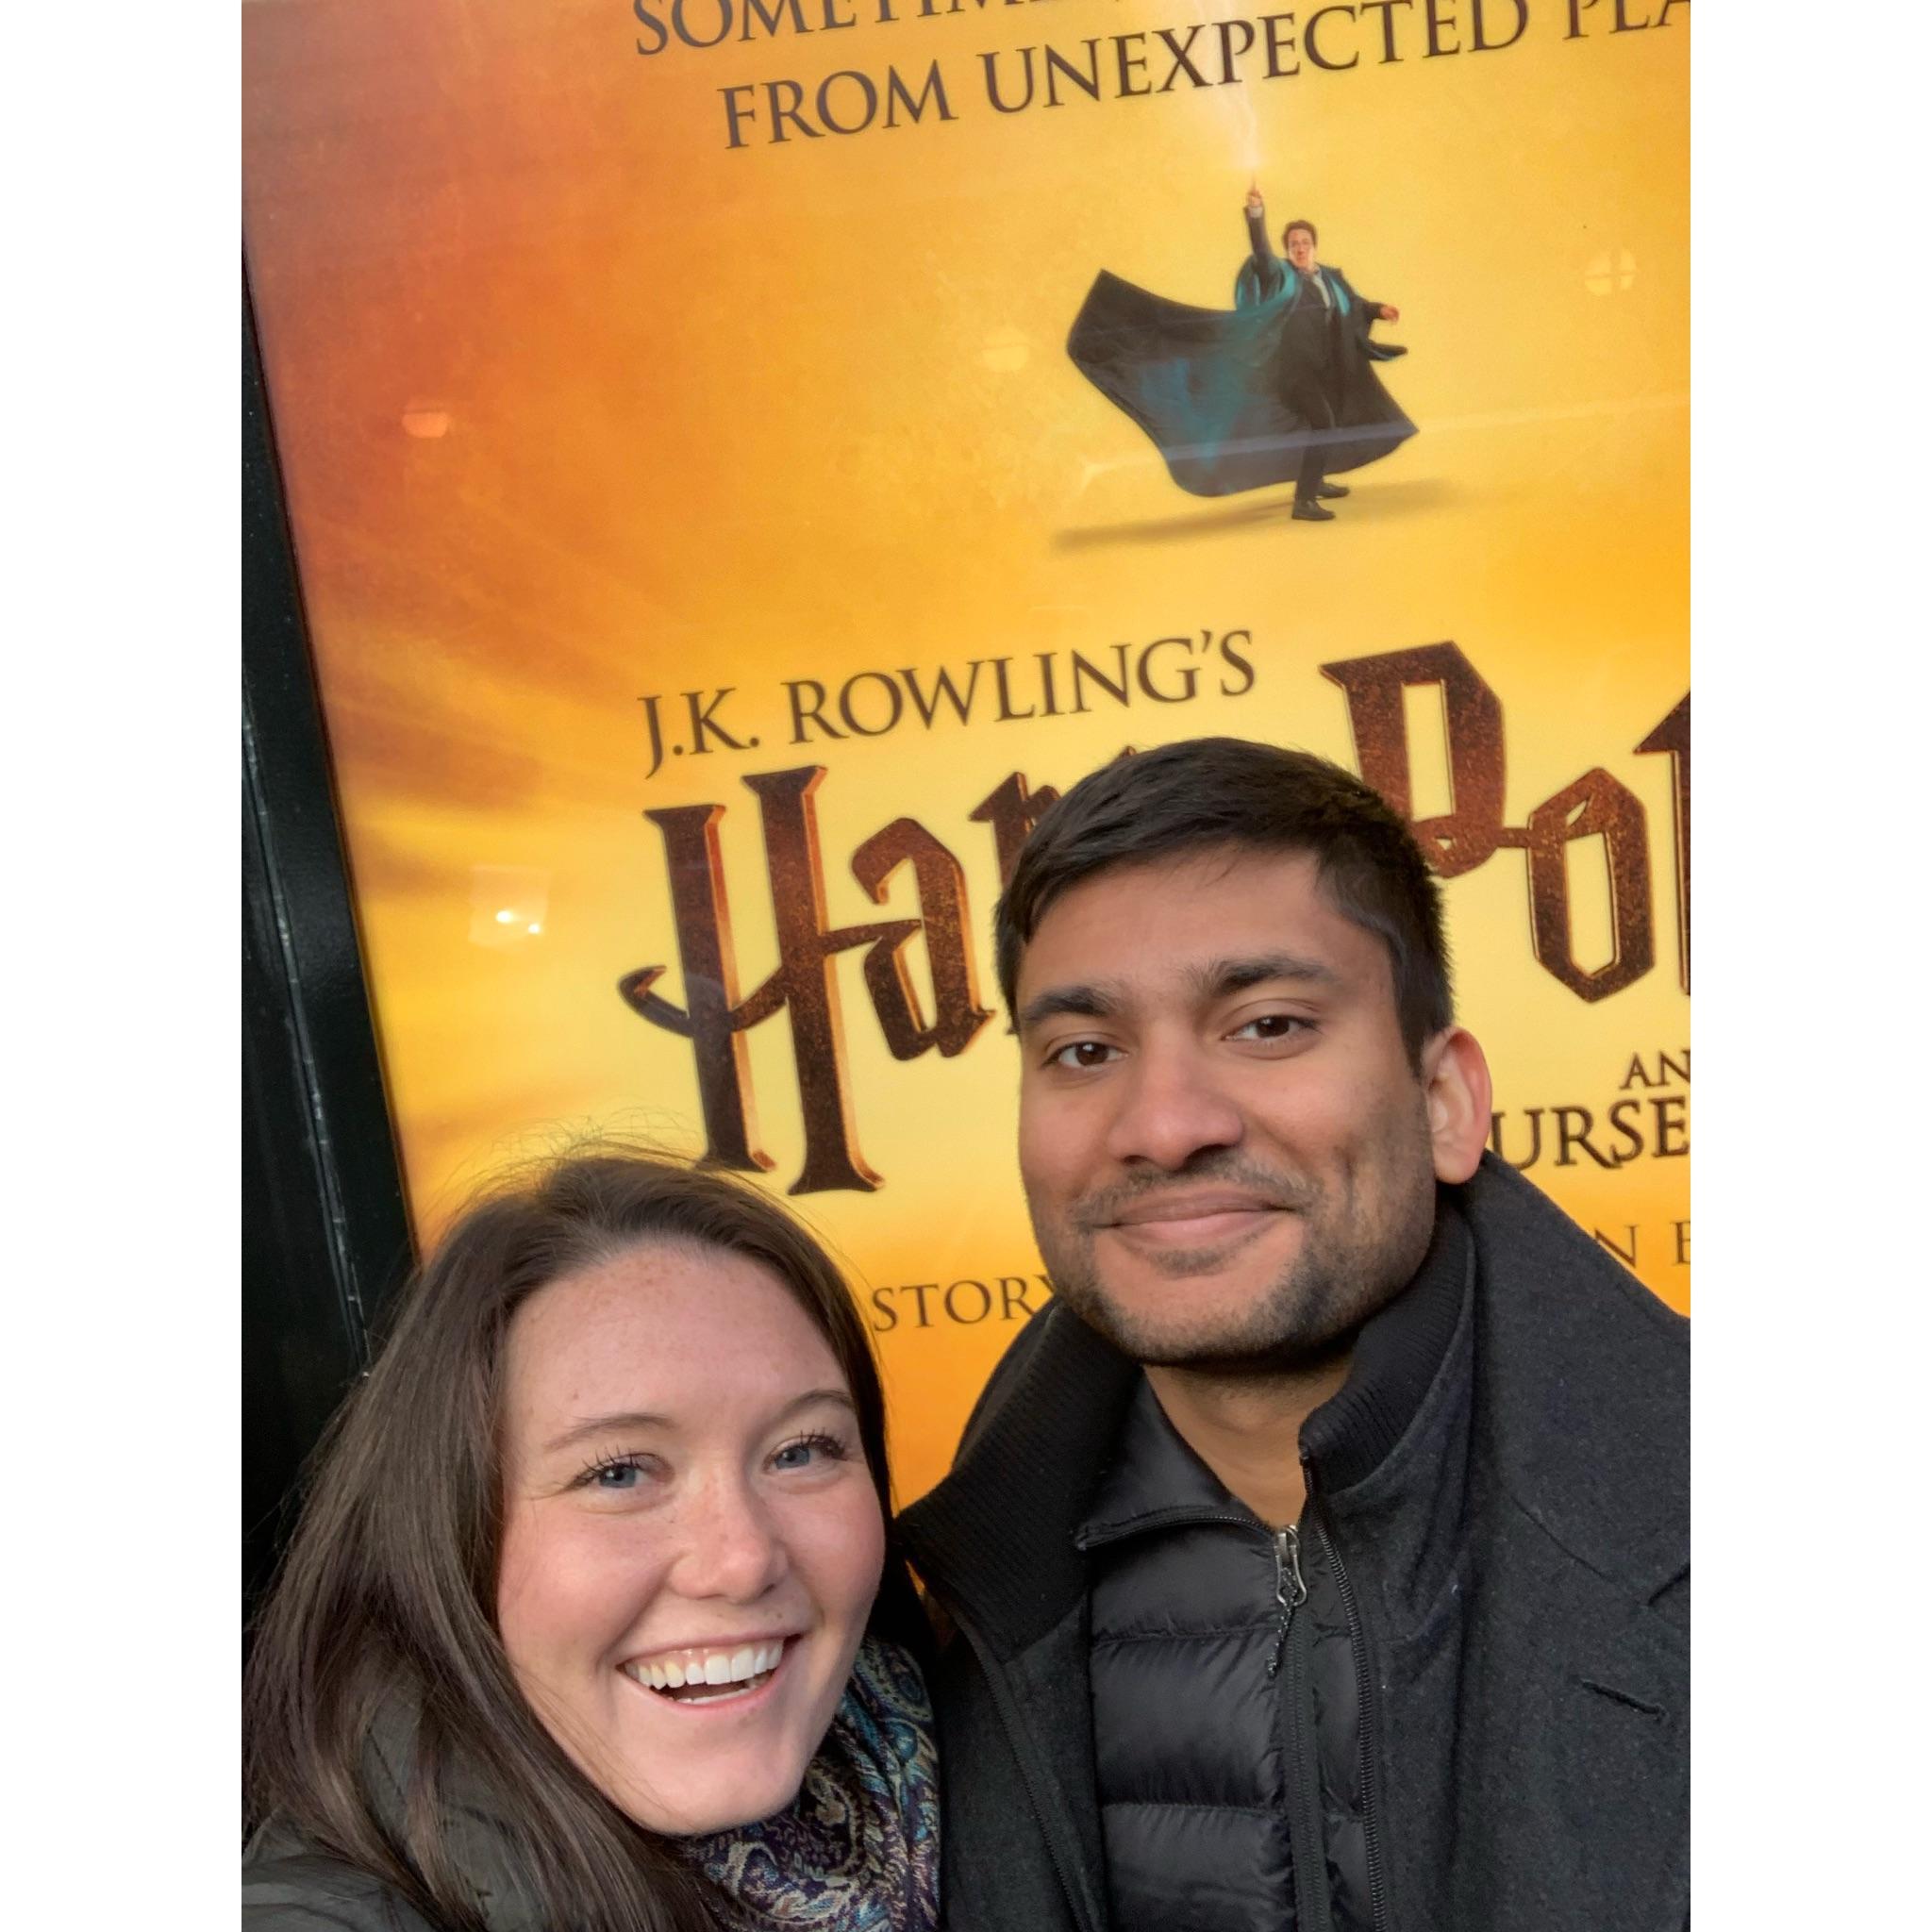 Harry Potter nerds living their best life at Harry Potter & the Cursed Child on Broadway!